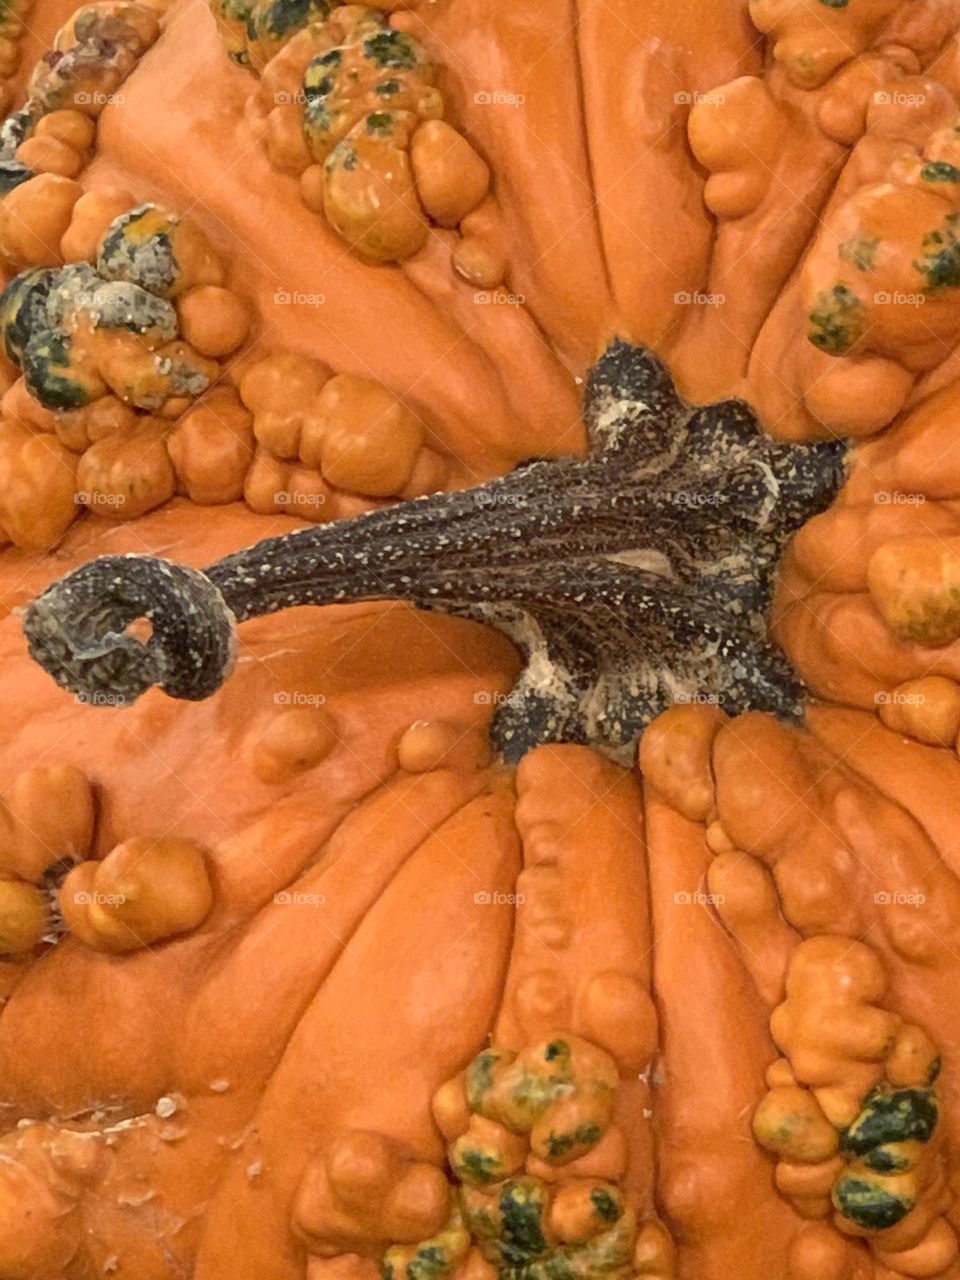 Witch or Gourd? Heeeee